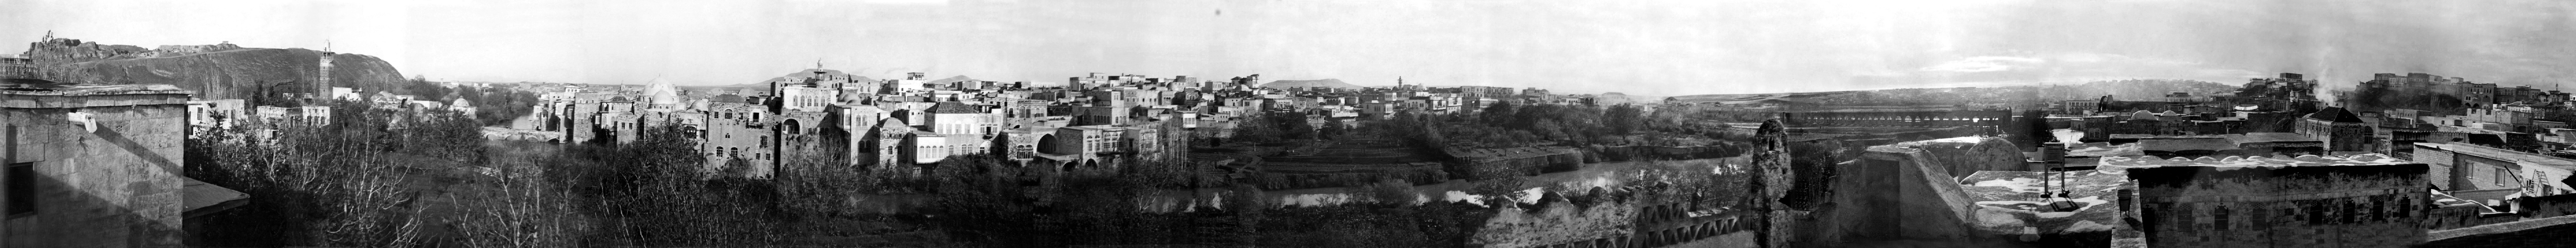  Hama - <p><strong>Hama, view from the Western Side of Orontes River towards Al-Kilaniyya Quarter</strong></p><p>Taken from a house in the At-Tawafira quarter, this panorama captures the Al-Kilaniyya quarter on the eastern side of the Orontes River. Notable landmarks from left to right are the citadel, the minaret of An-Nuri Mosque, Al-Sultan Bathhouse, Al-Kilaniyya bridge, Al-Kilaniyya quarter, Noria al-Jisriyya with the water canal, and Noria Al-Mamuriyya.</p>